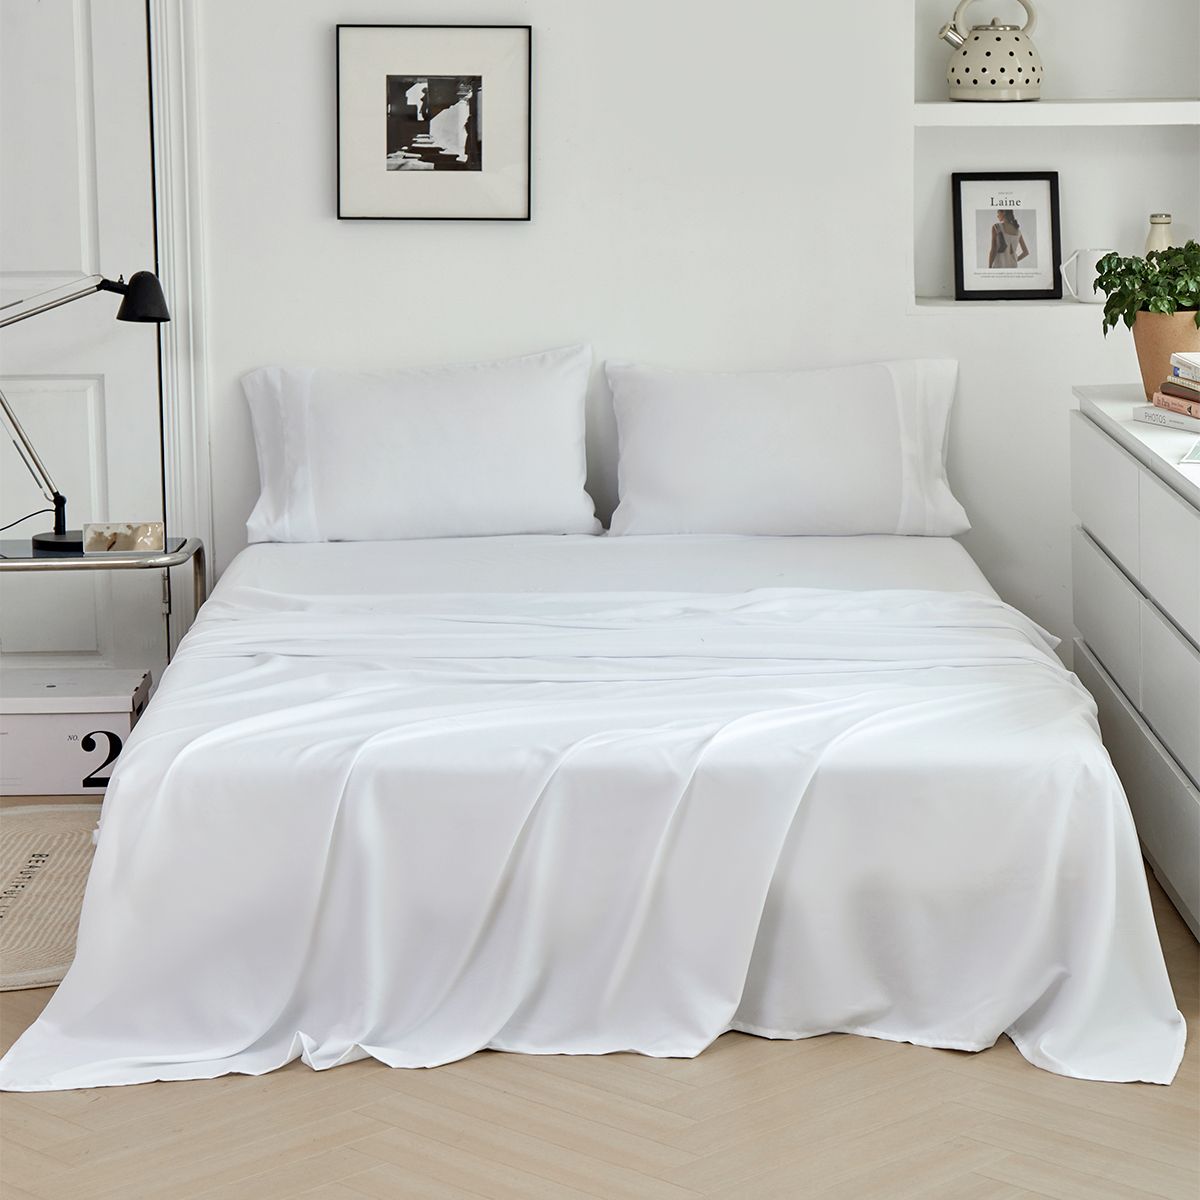 Solid Color Bedding Set: Three-piece Set With Fitted Sheet, Pillowcase, And Flat Sheet (Duvet Cover Not Included)